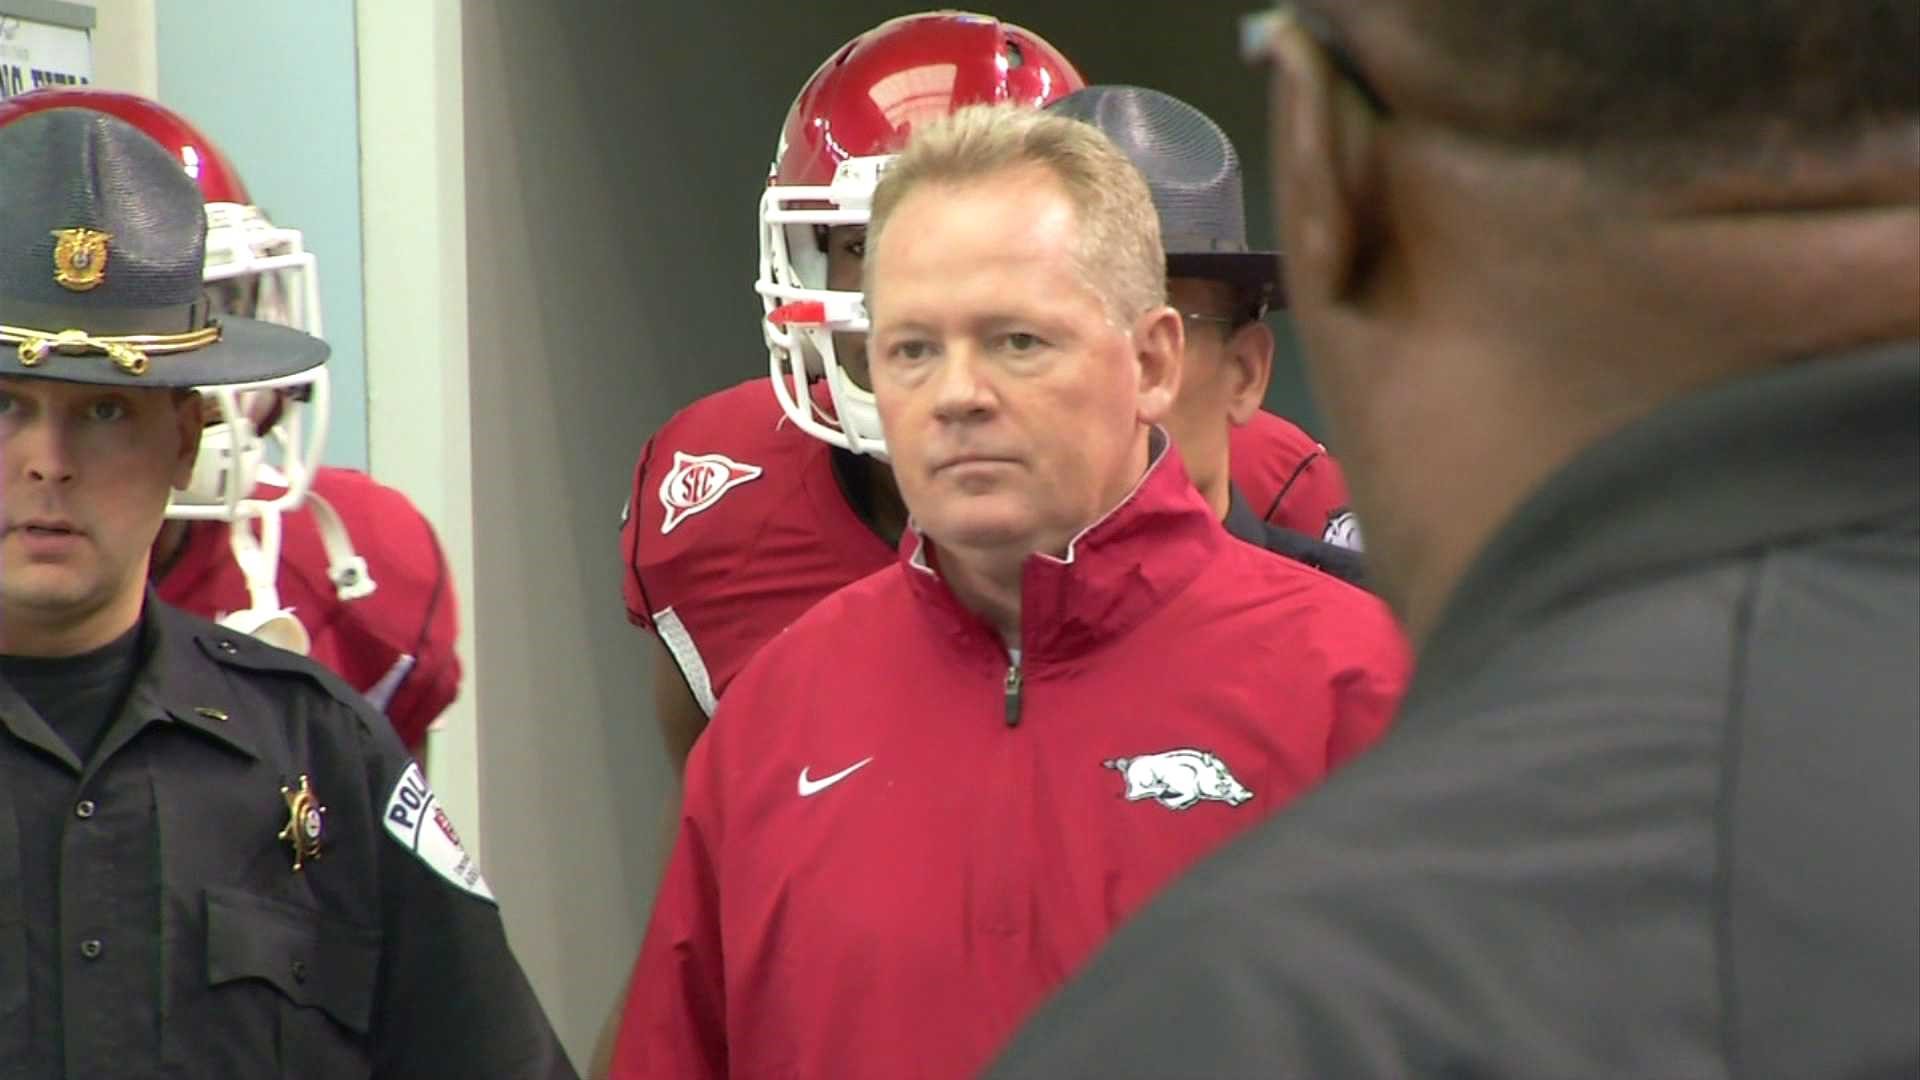 Bobby Petrino is coming back to Arkansas football as the offensive coordinator